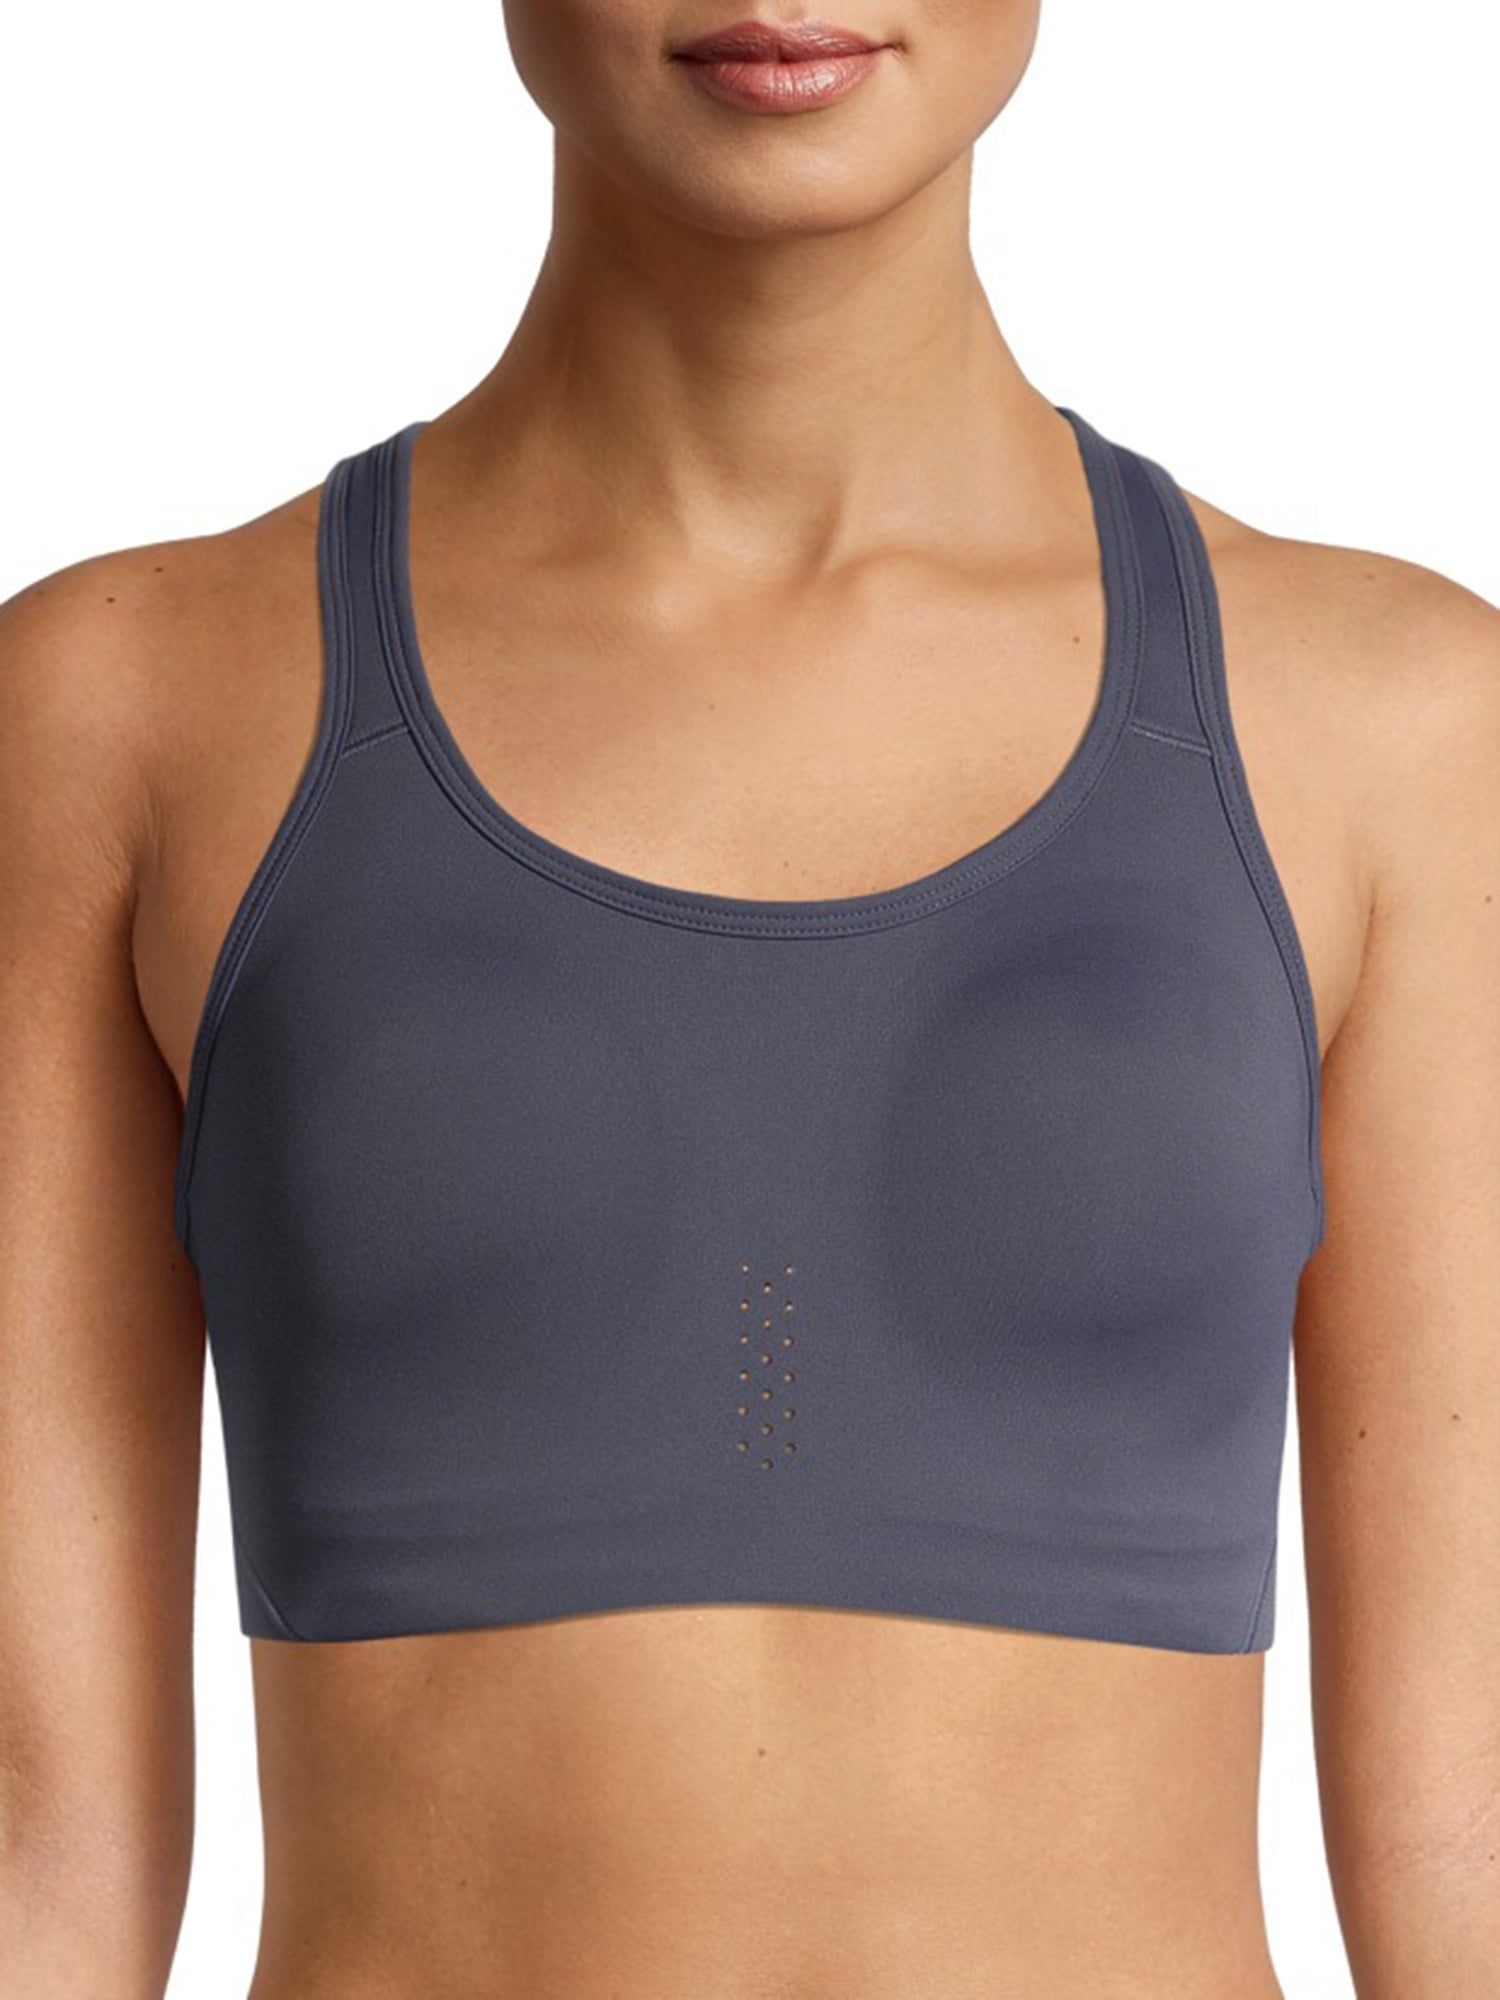 Avia Women's Active Molded Cup Sports Bra 